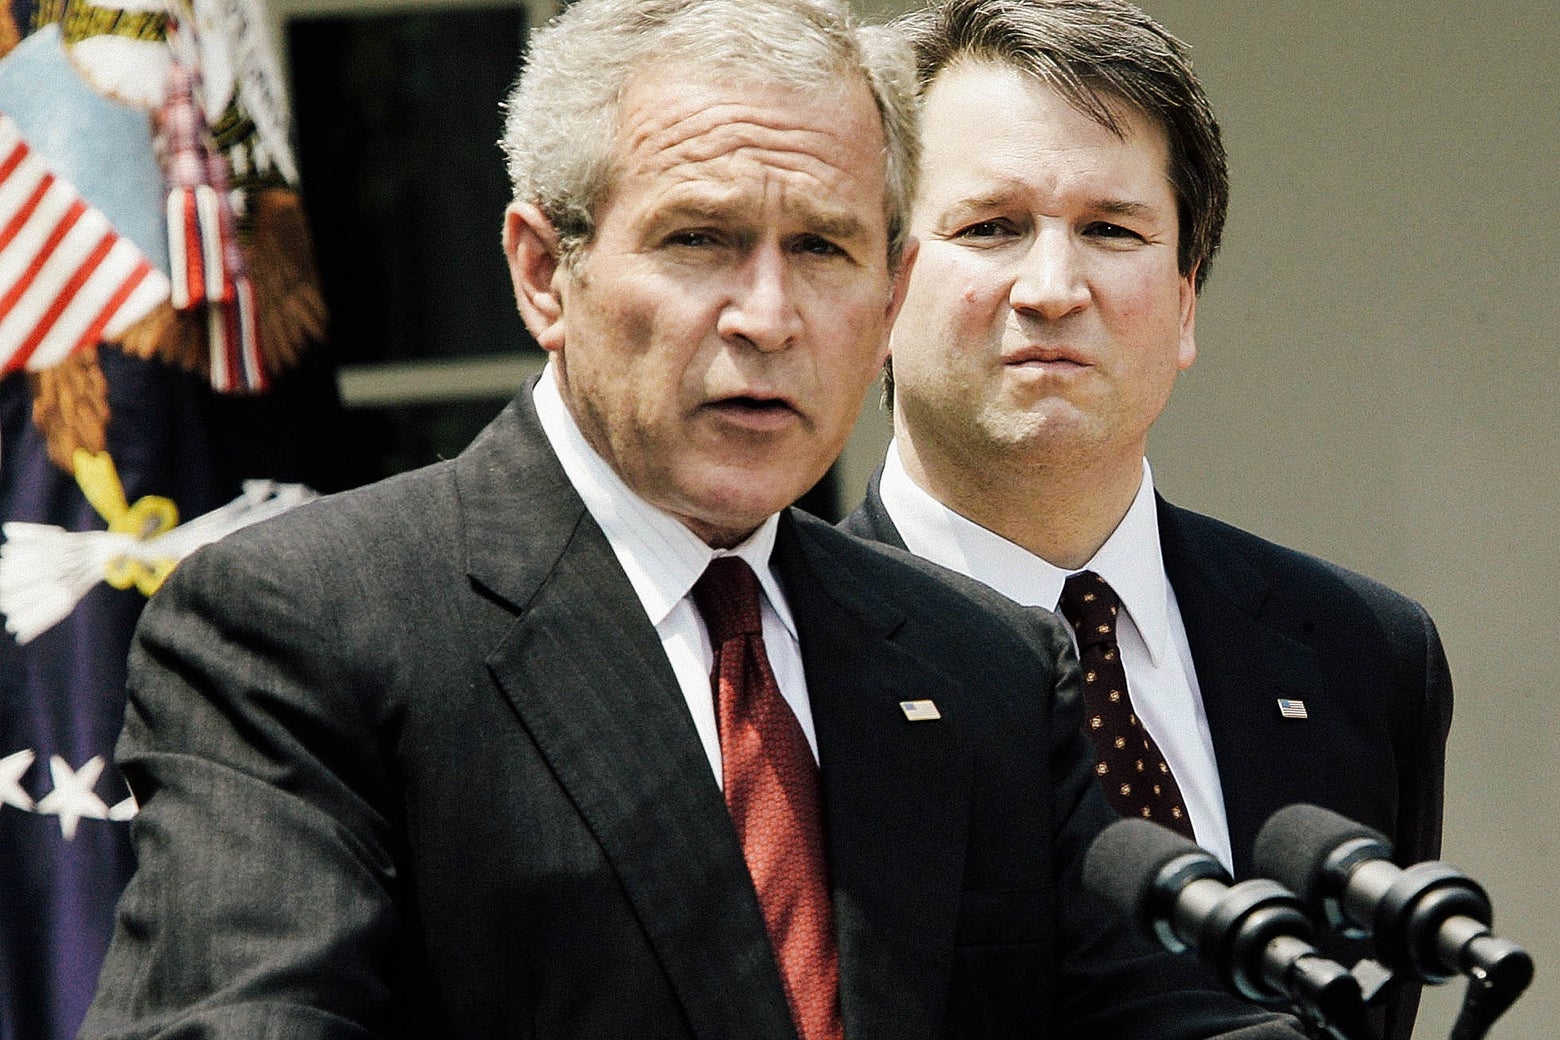 President George W. Bush speaks during the swearing-in ceremony for Brett Kavanaugh to be a judge to the U.S. Circuit Court of Appeals for the District of Columbia on June 1, 2006.